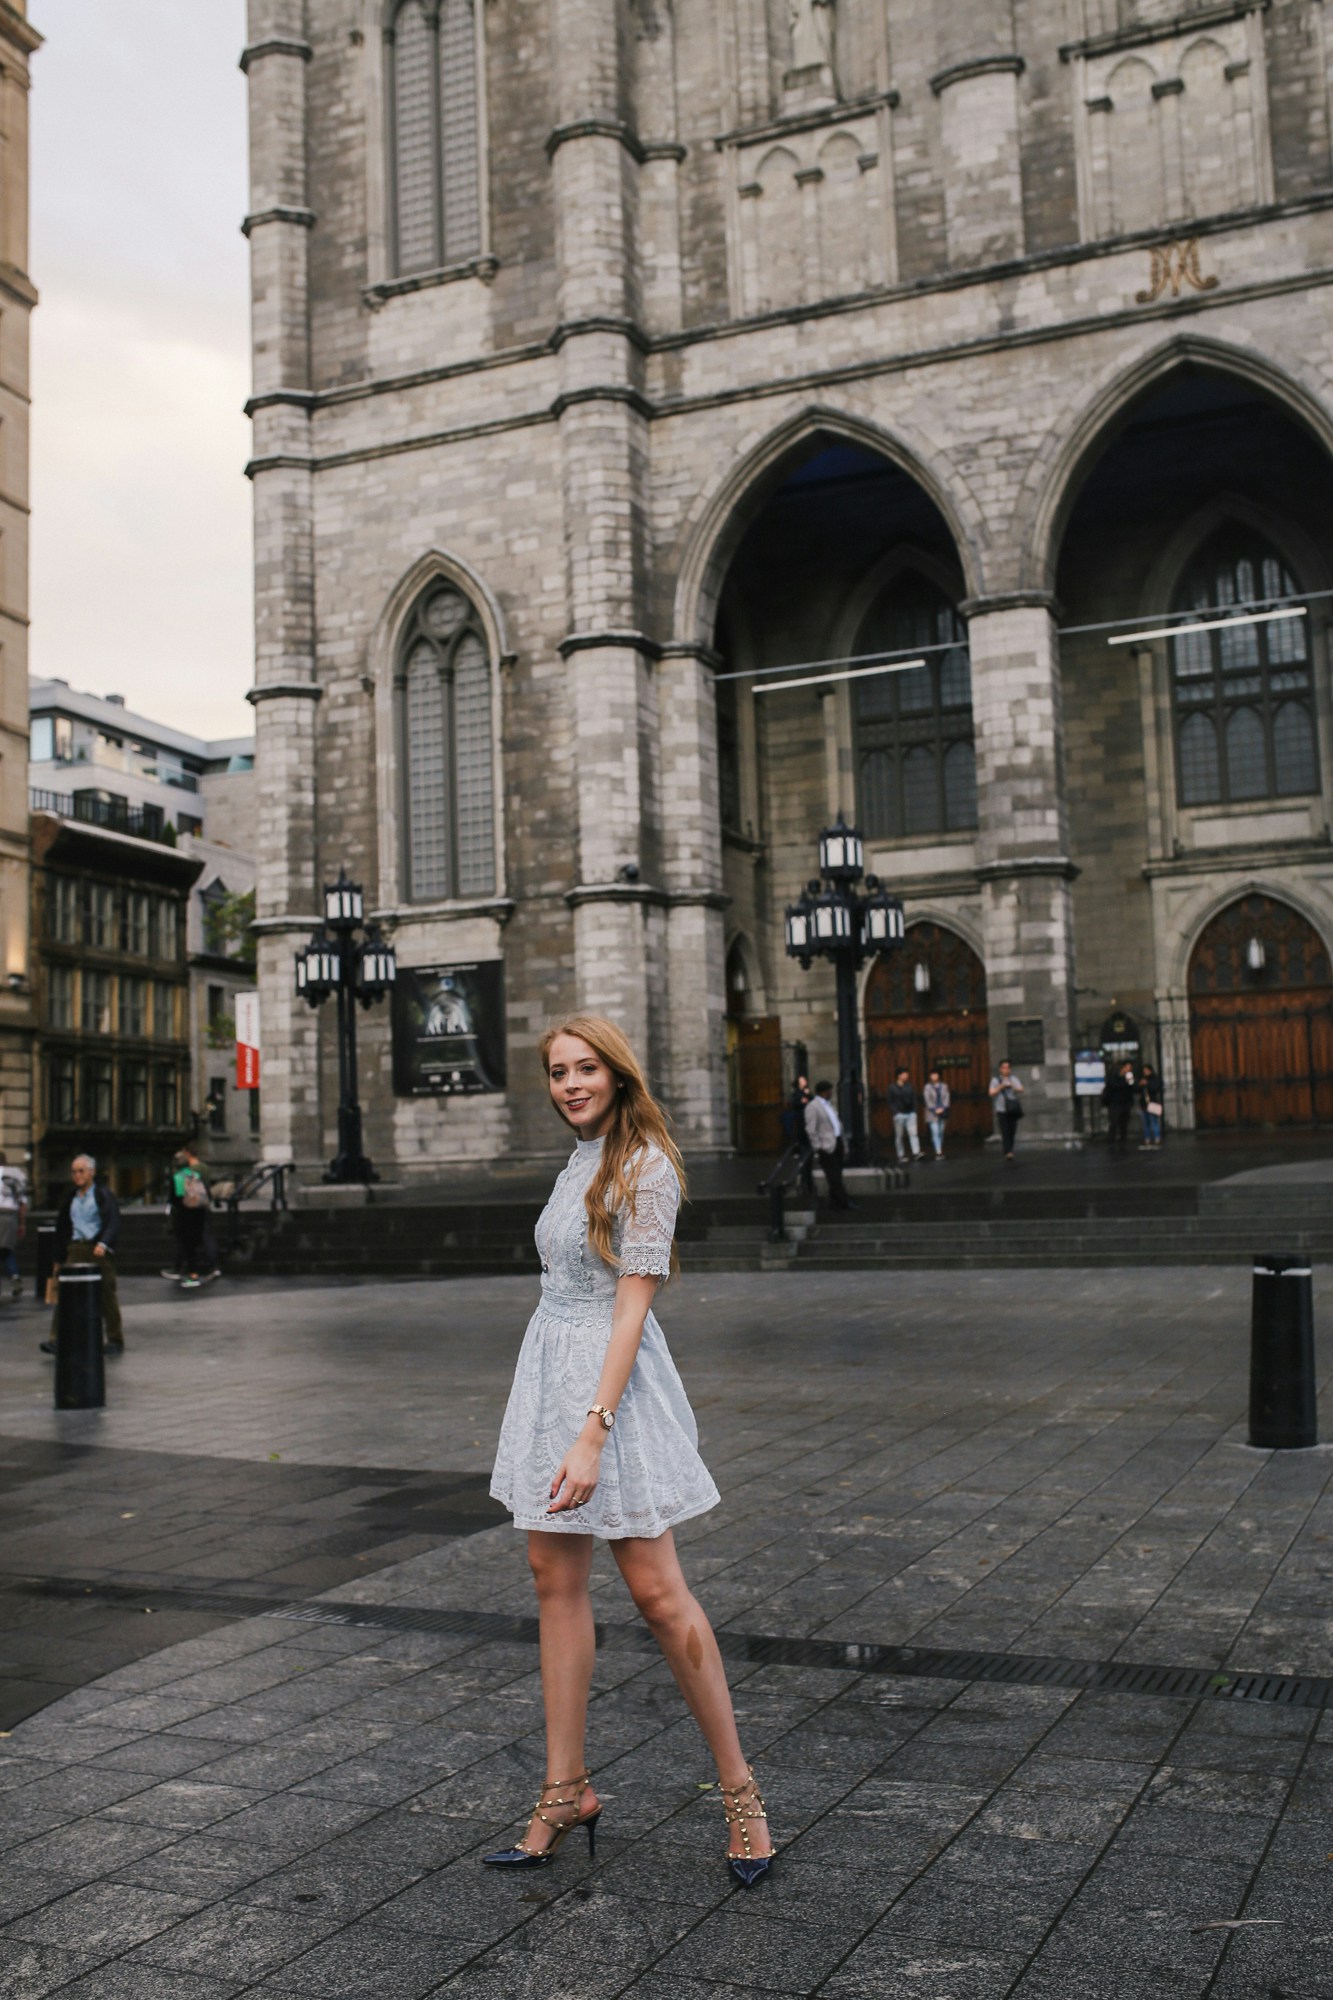 Notre Dame de Montréal is one of my favourite spots to visit in Montreal, and easily one of the most Instagrammable, photogenic locations in Vieux Port